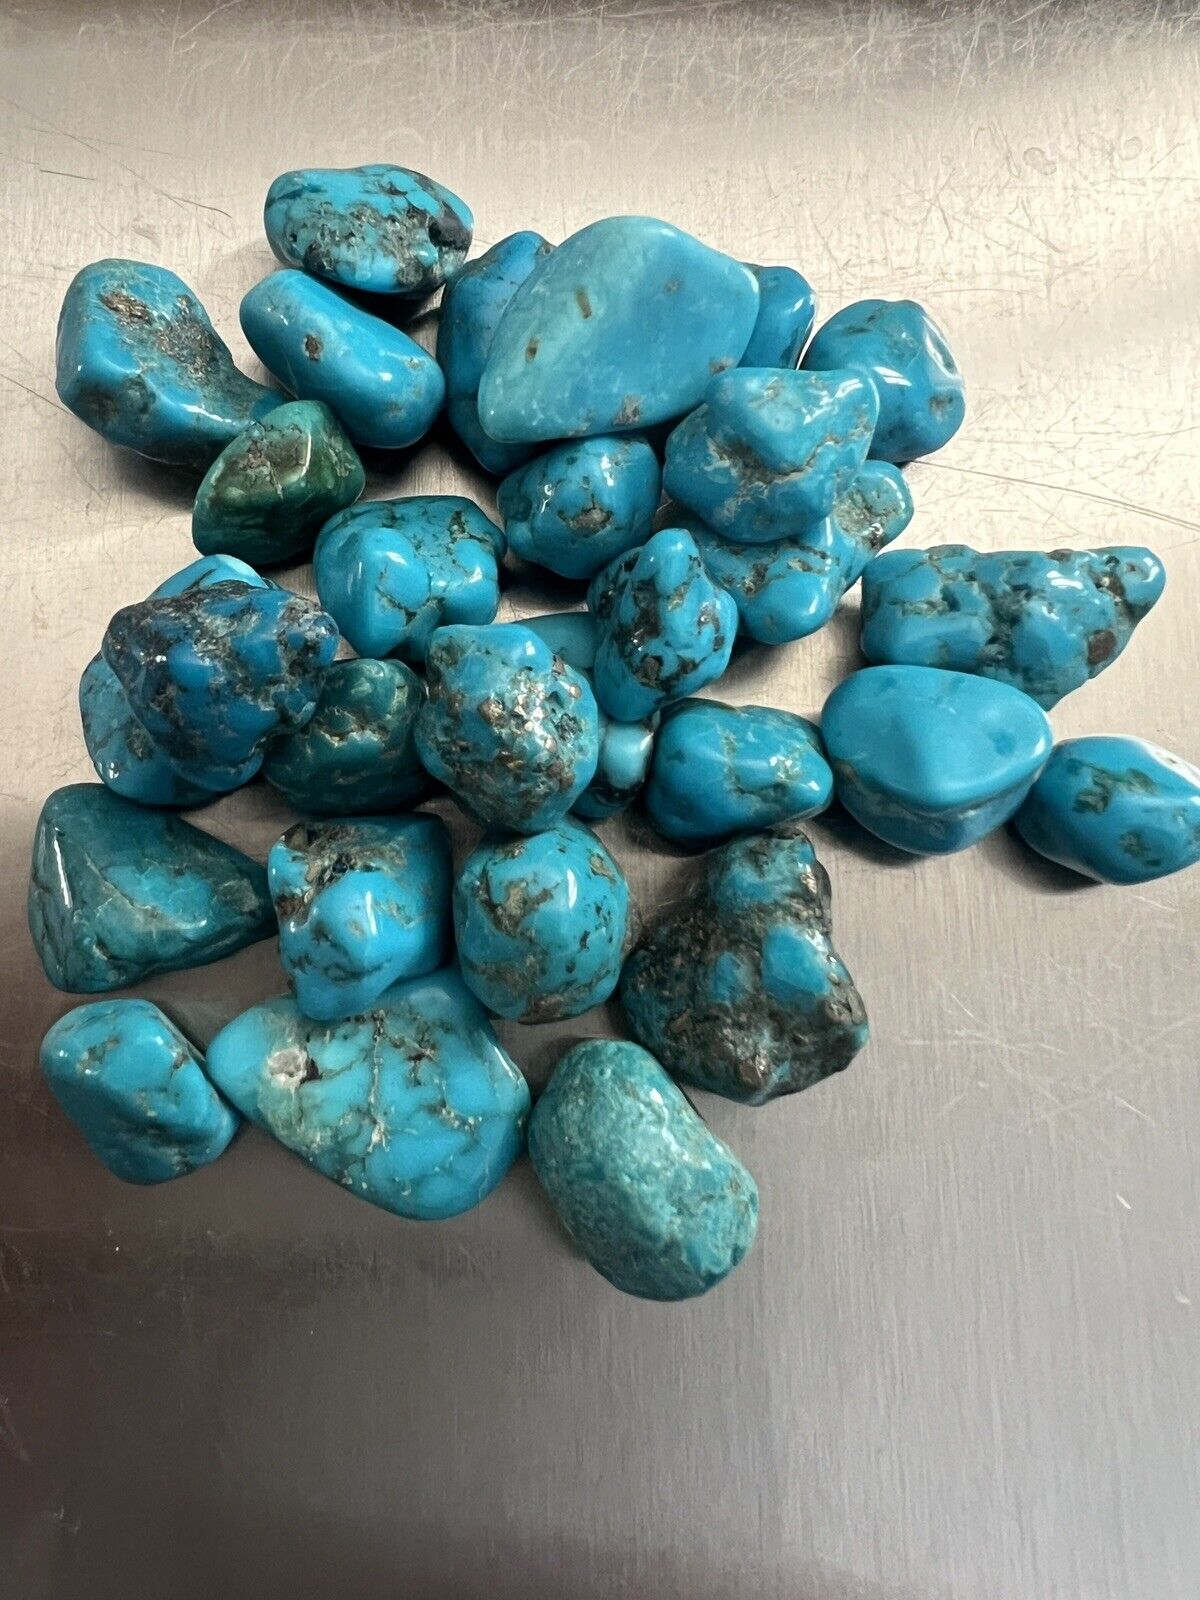 Natural Old Waterweb Southwest USA Turquoise Rough Stone Gem 50 Gram Lot d